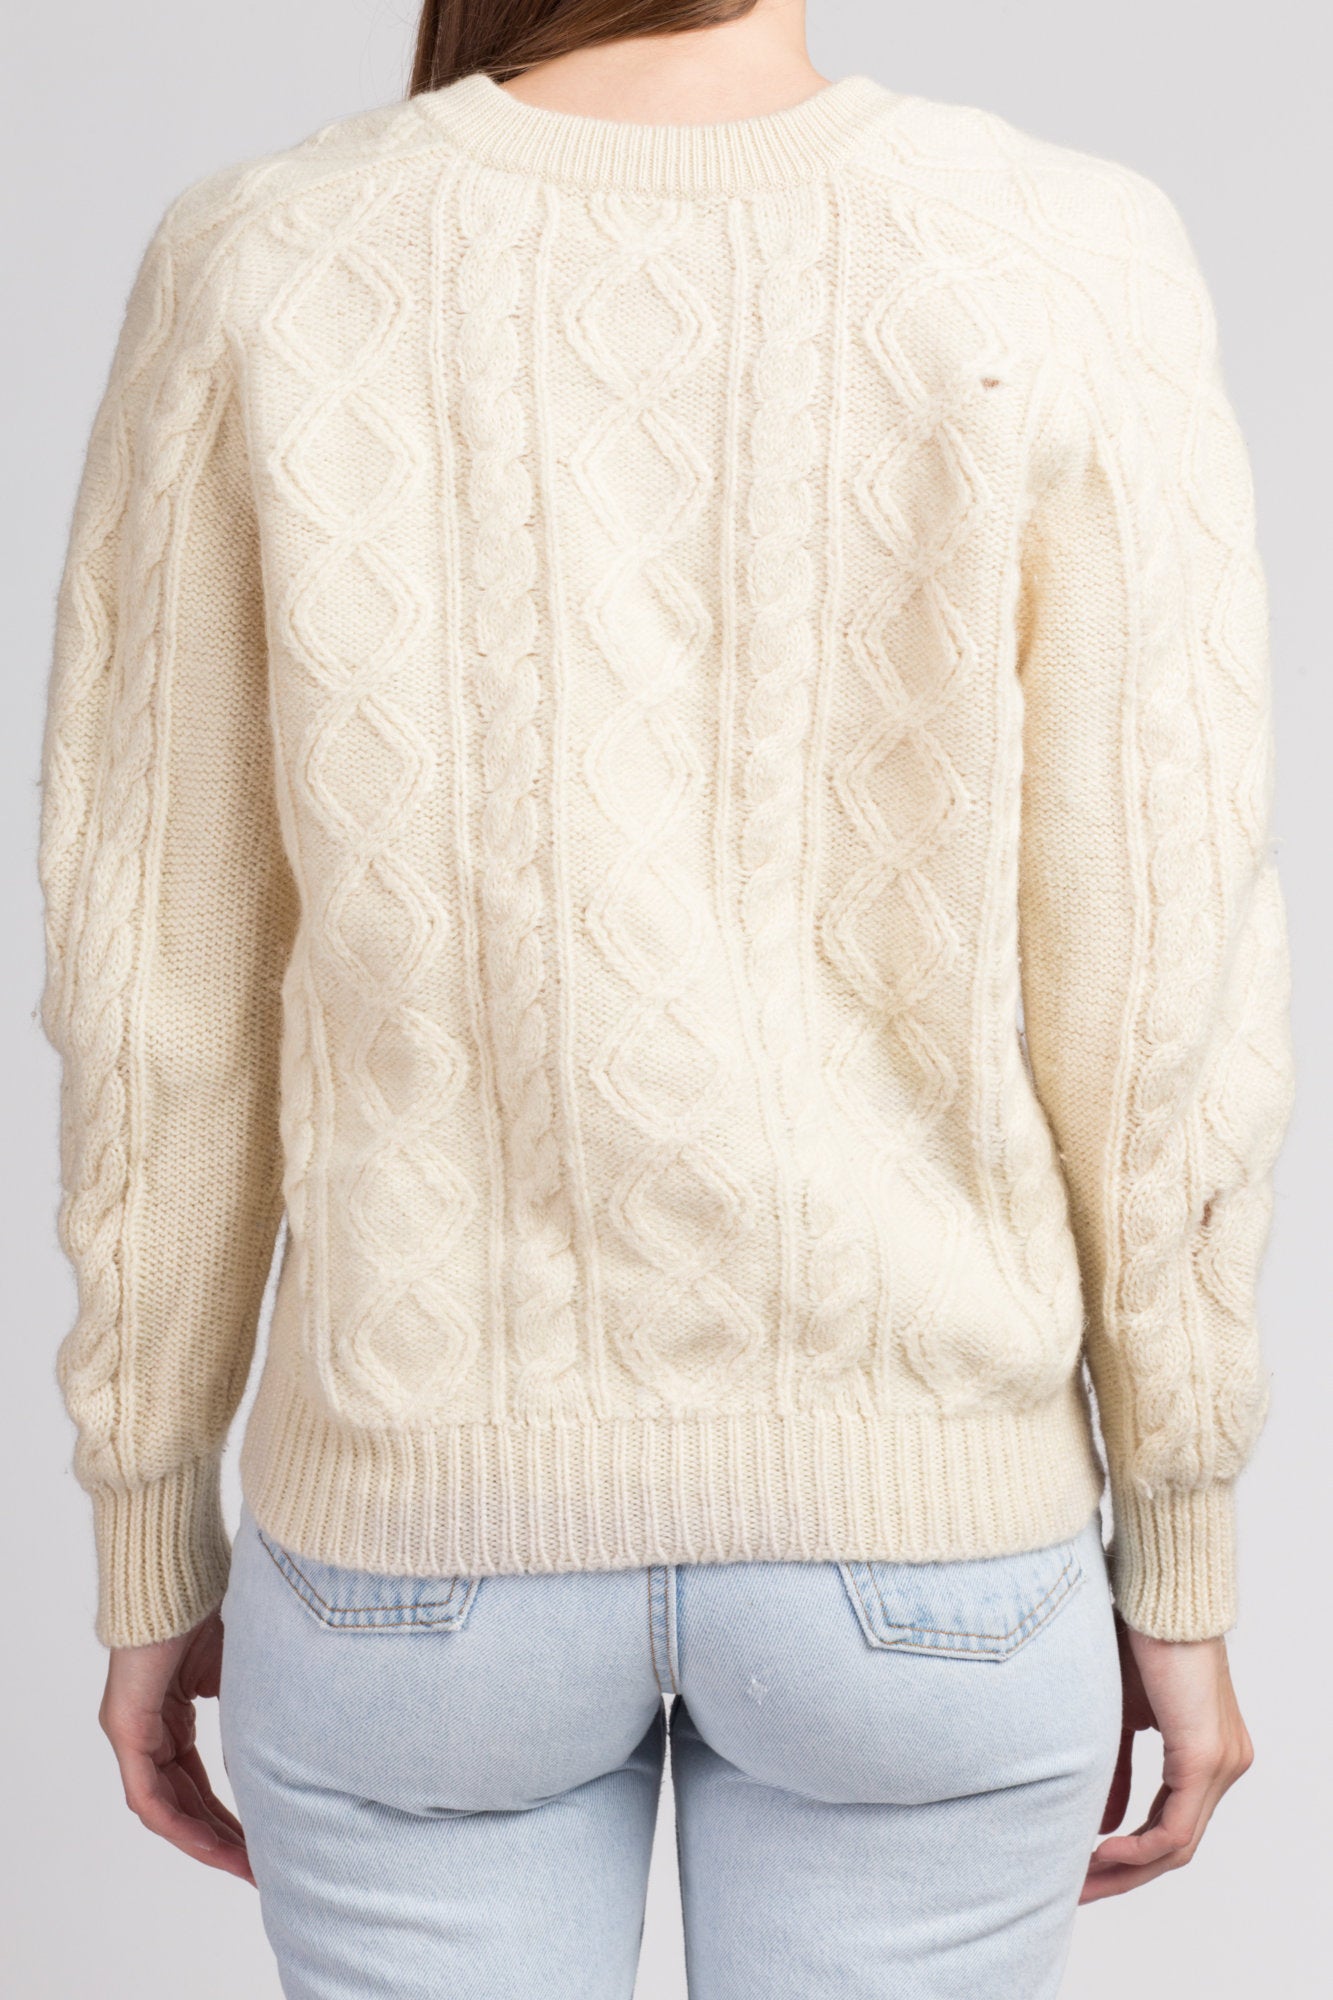 70s Cable Knit Fisherman Sweater - Small